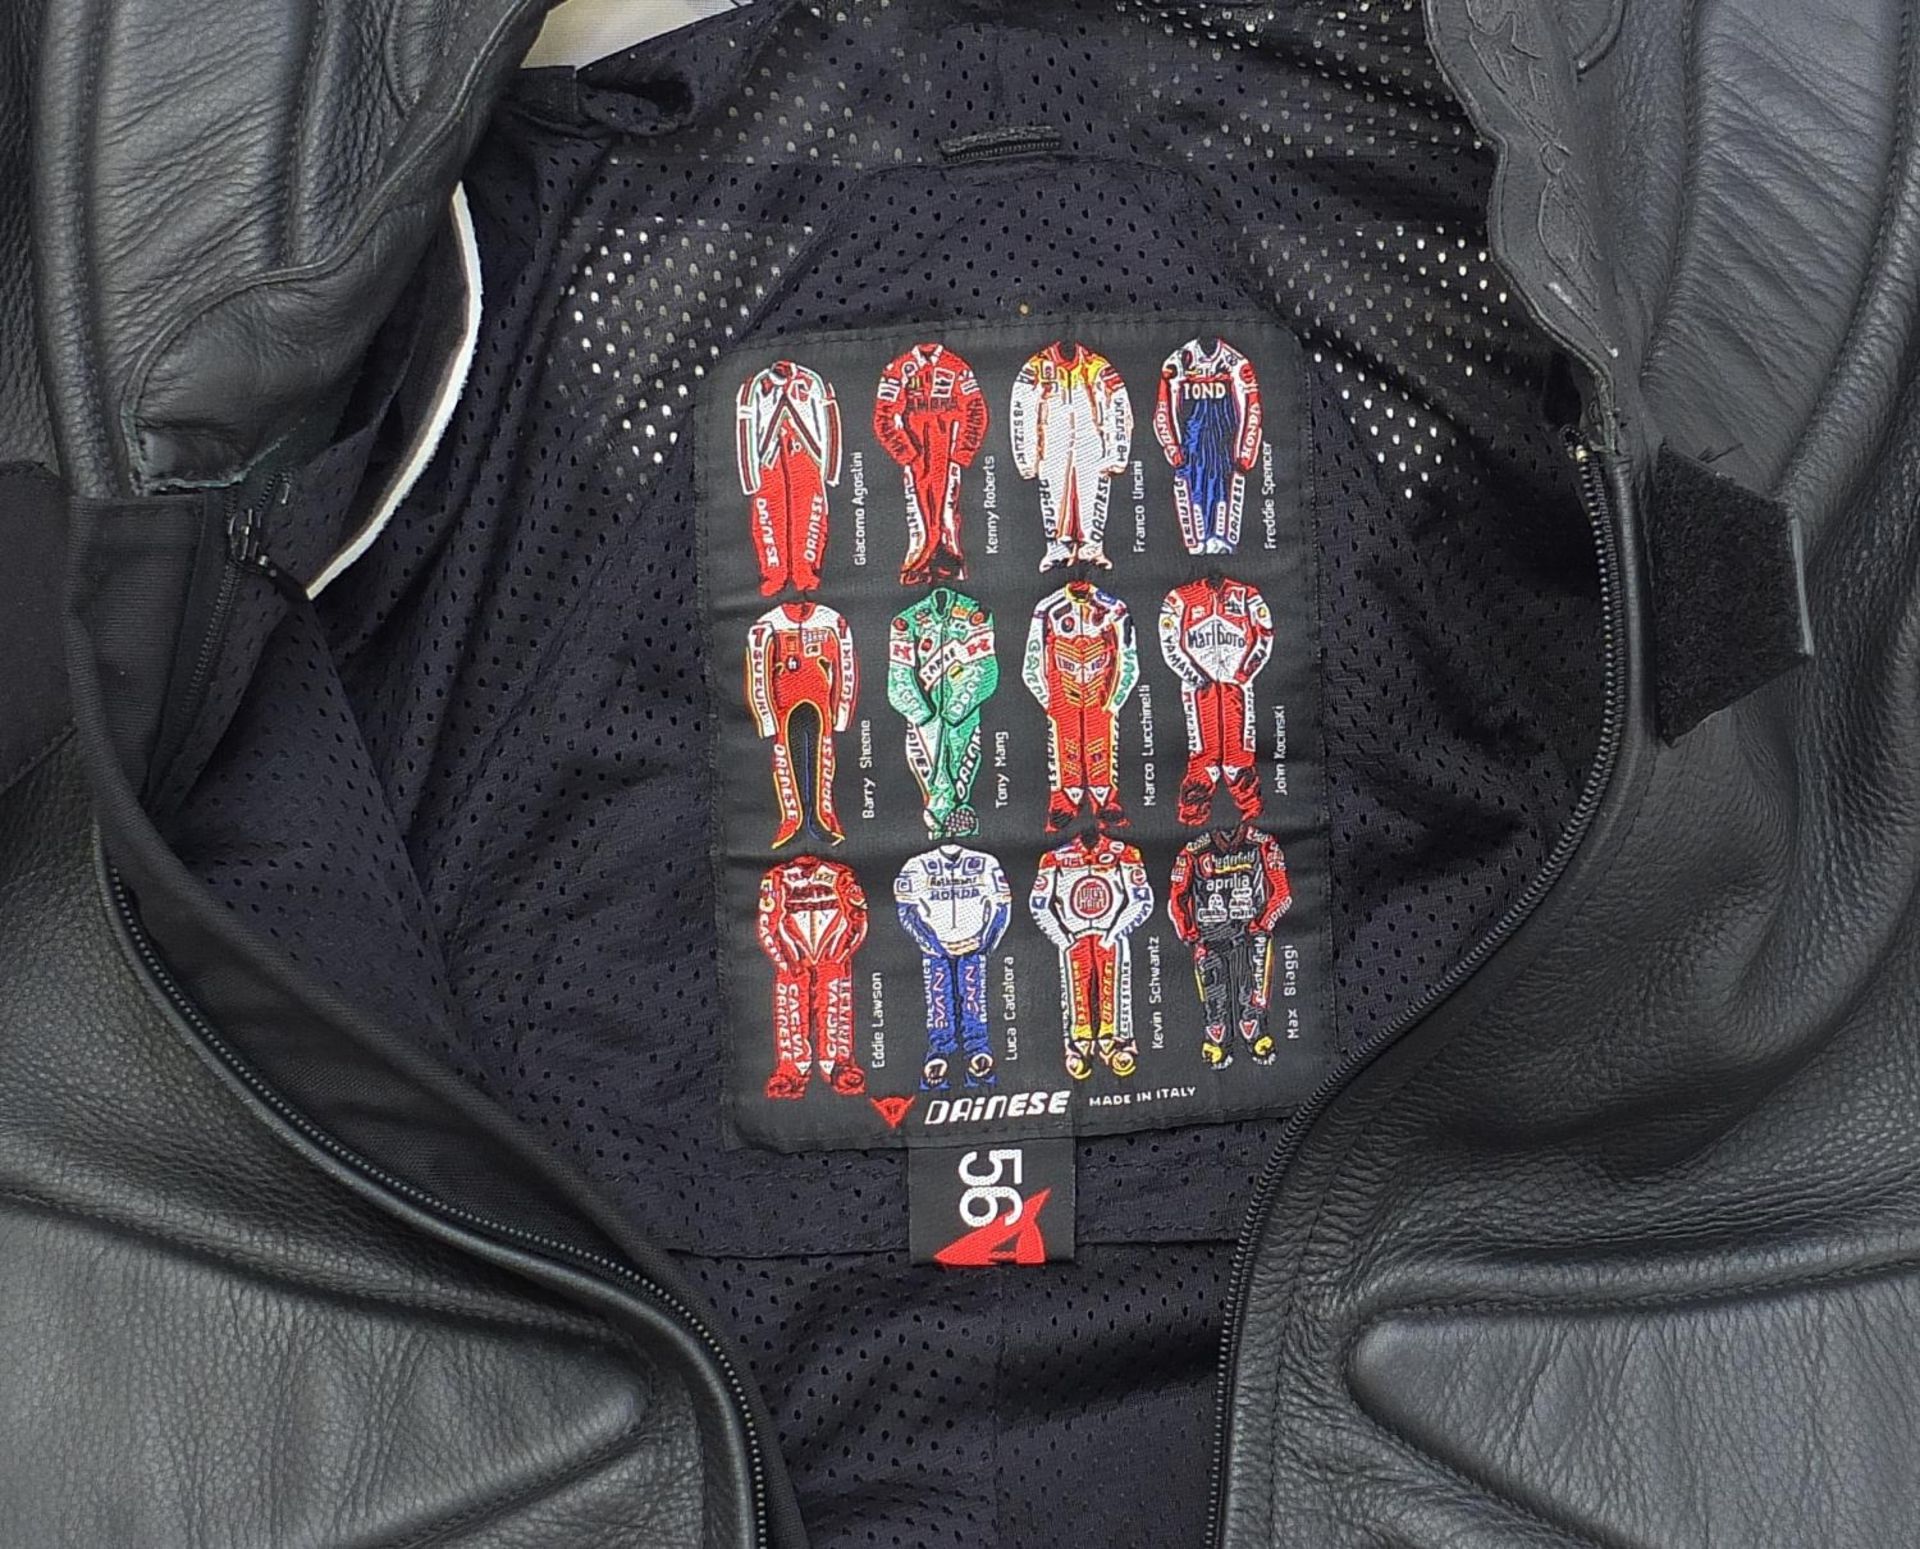 Dainese, all in one motorcycle leathers, size 56 - Image 2 of 3